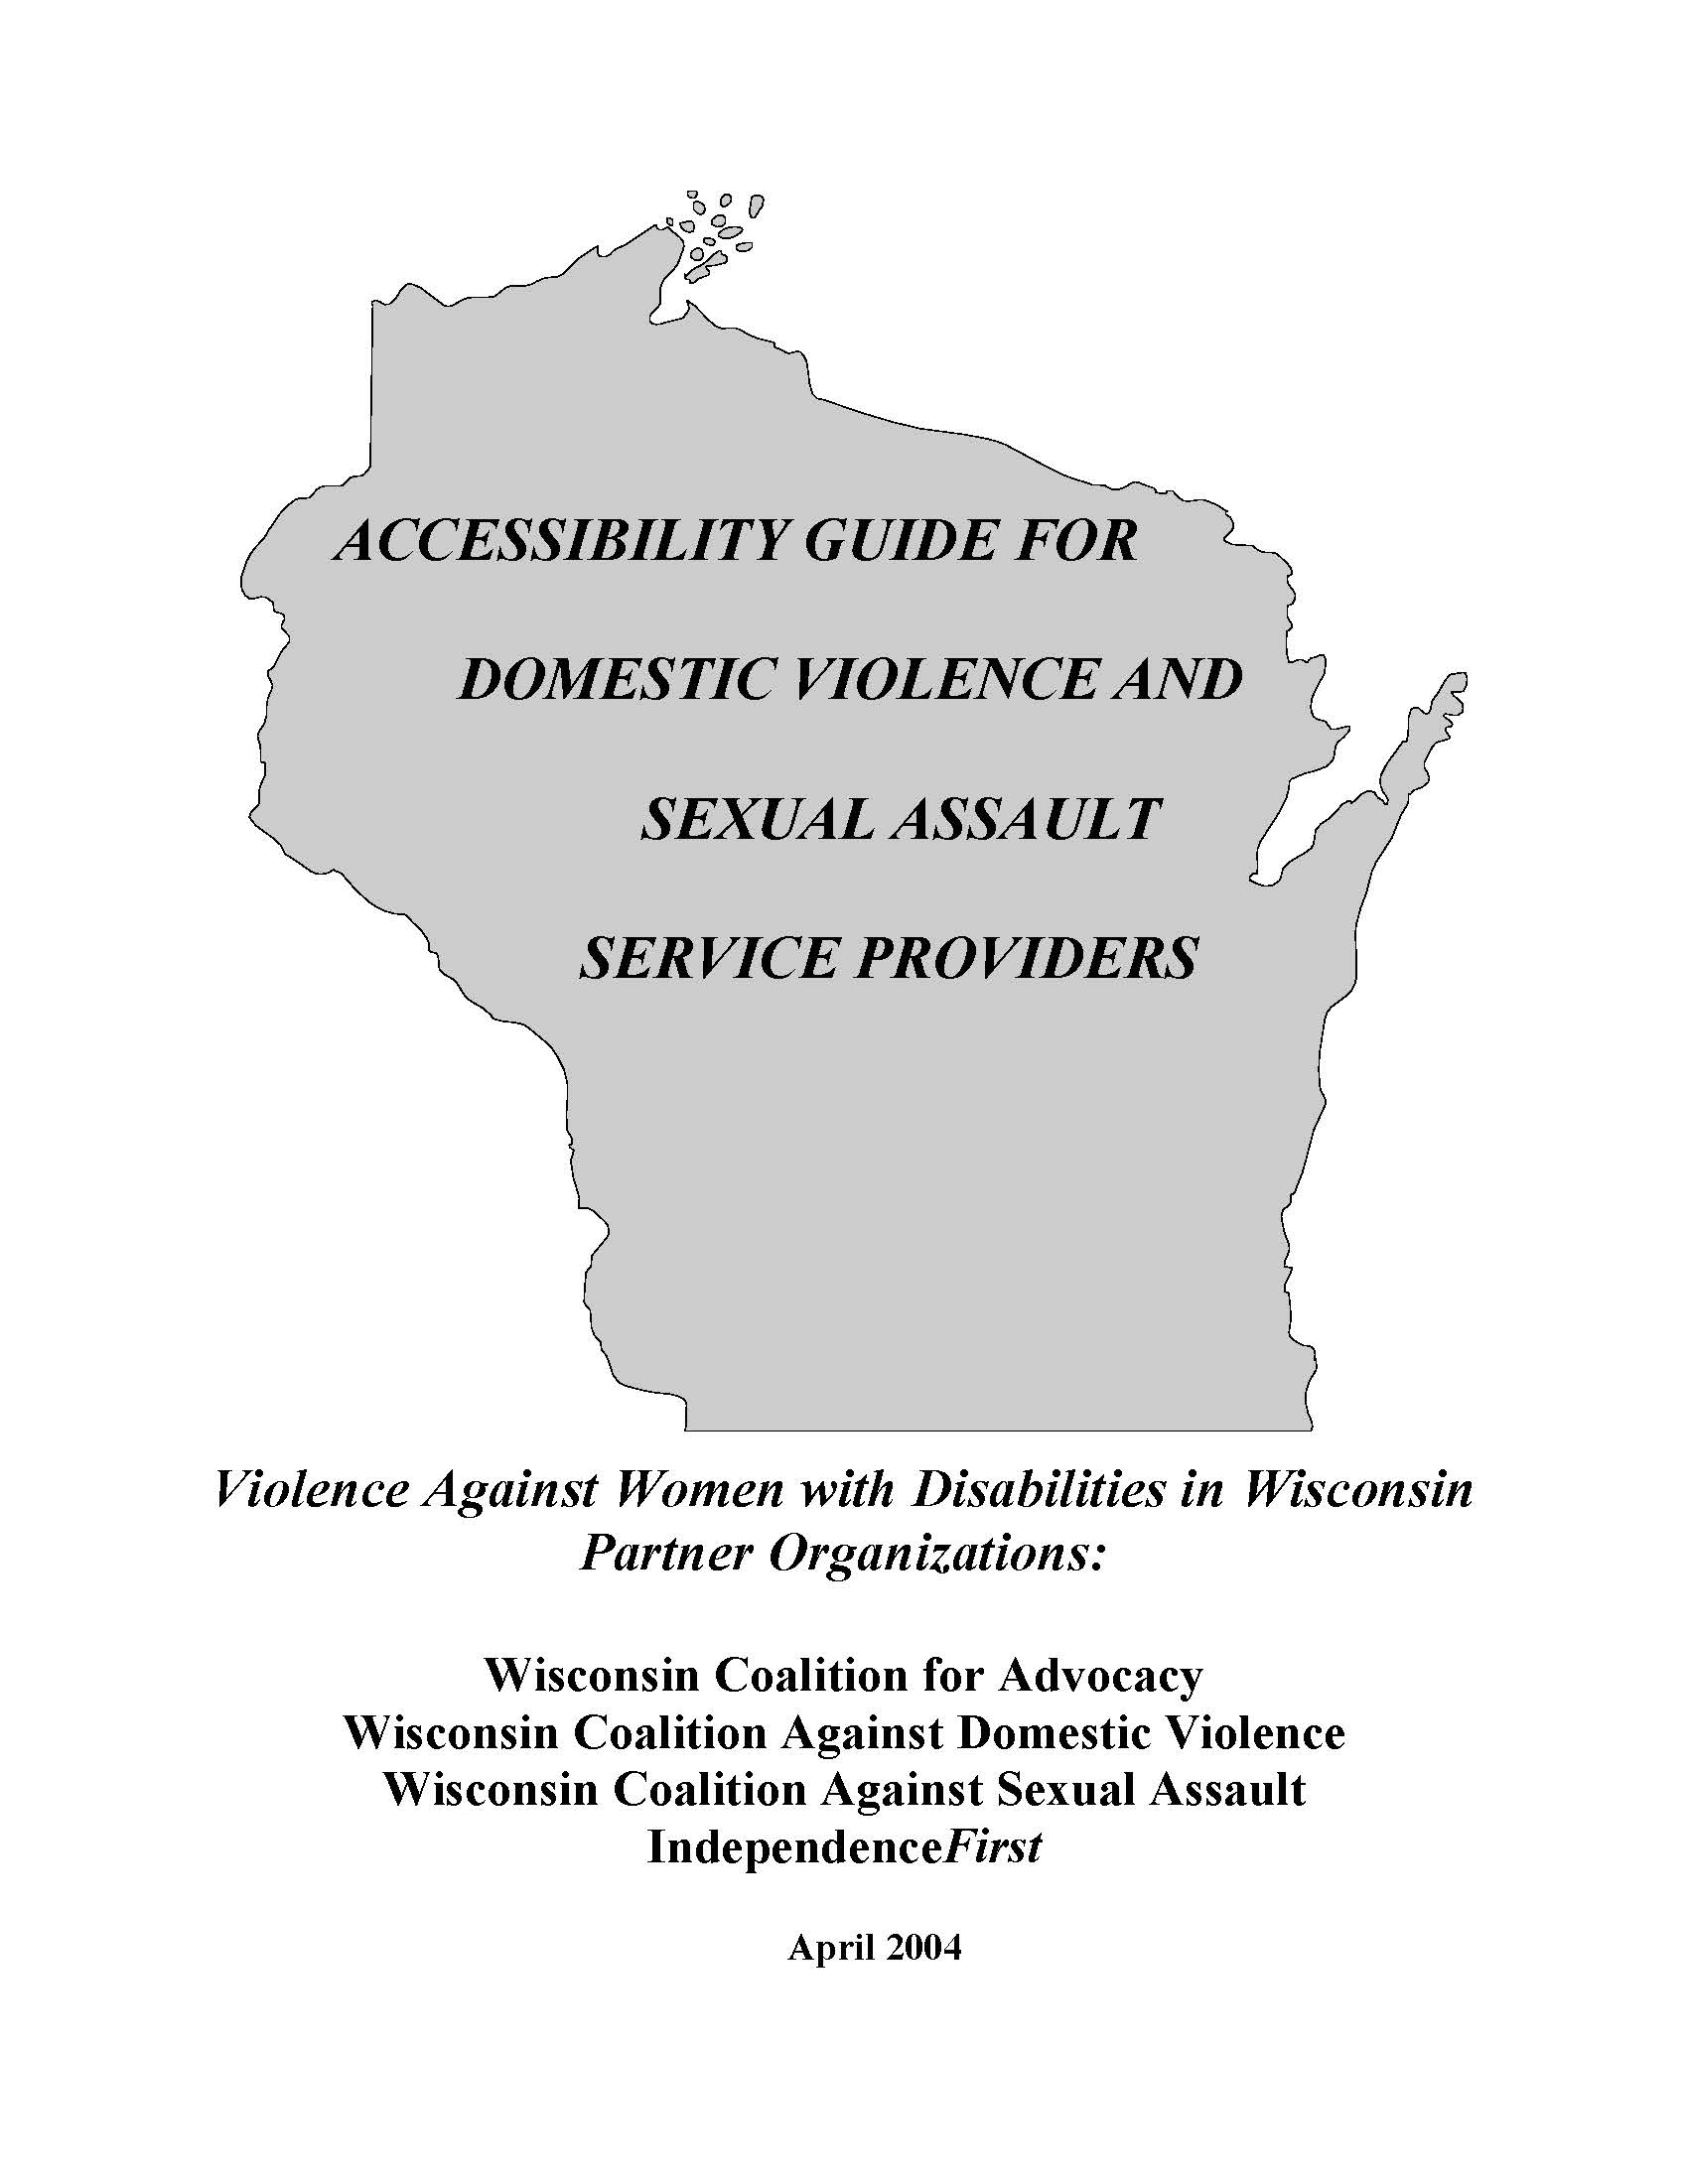 Grey outline in the shape of the state of Wisconsin with the text over top, Accessibility Guide for Domestic Violence and Sexual Assault Service Providers, Violence Against Women with Disabilities in Wisconsin, Partner Organizations: Wisconsin Coalition for Advocacy, Wisconsin Coalition Against Domestic Violence, Wisconsin Coalition Against Sexual Assault, IndependenceFirst, April 2004. 